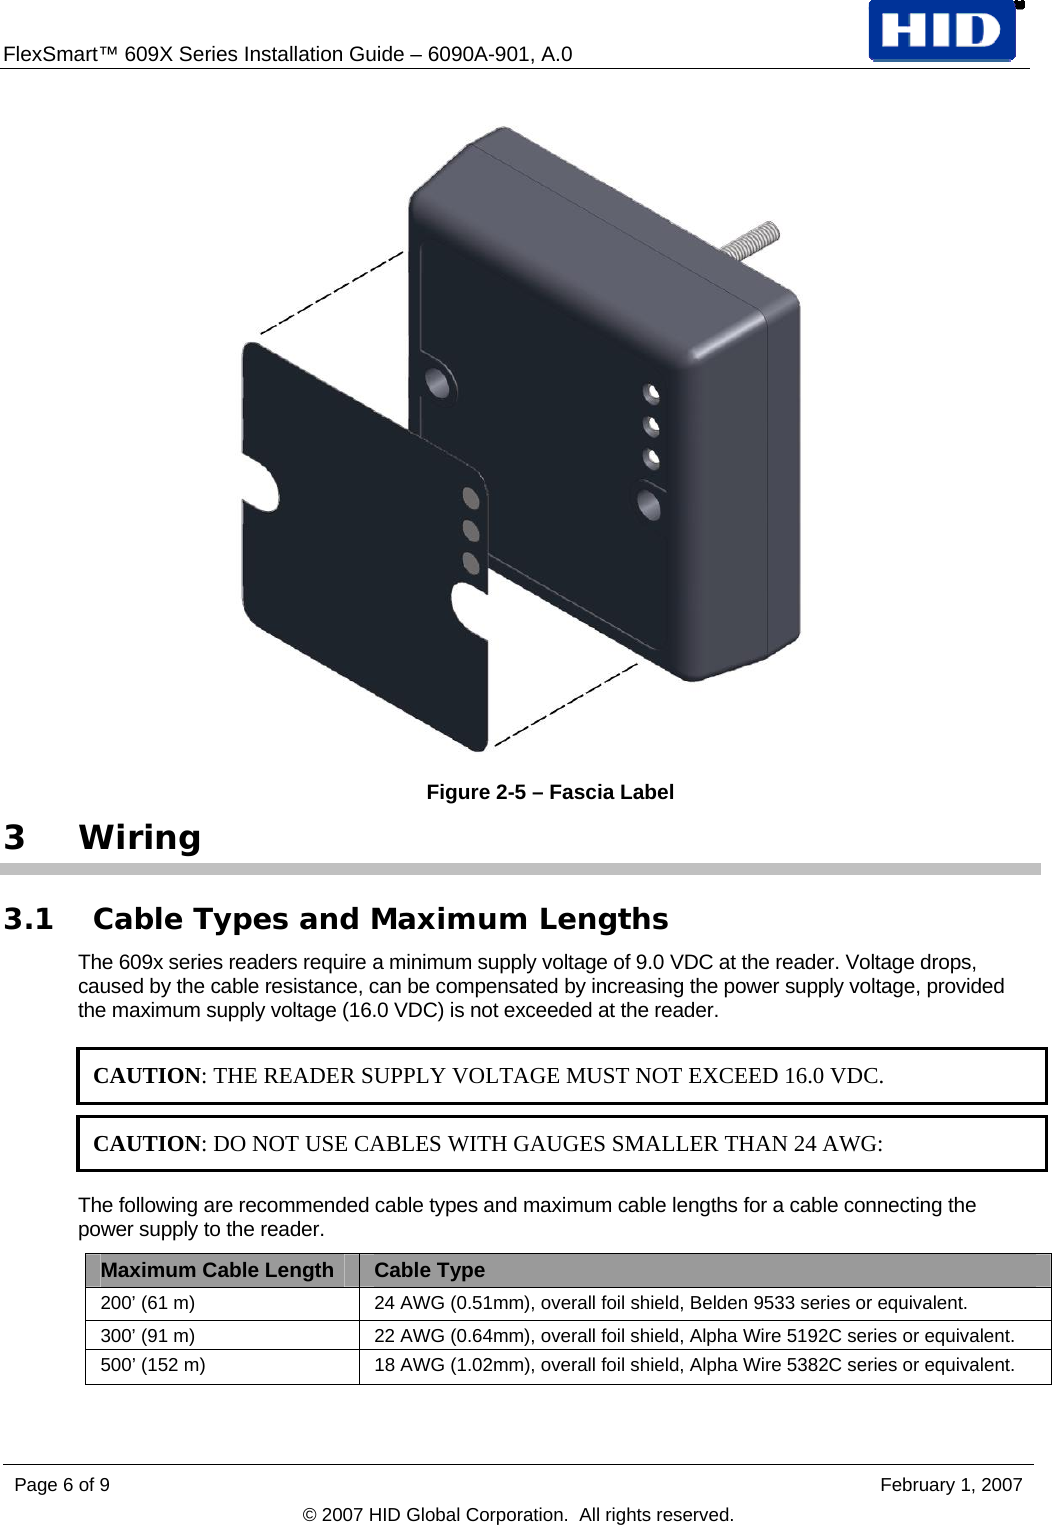 FlexSmart™ 609X Series Installation Guide – 6090A-901, A.0    Figure 2-5 – Fascia Label 3 Wiring 3.1 Cable Types and Maximum Lengths The 609x series readers require a minimum supply voltage of 9.0 VDC at the reader. Voltage drops, caused by the cable resistance, can be compensated by increasing the power supply voltage, provided the maximum supply voltage (16.0 VDC) is not exceeded at the reader.  CAUTION: THE READER SUPPLY VOLTAGE MUST NOT EXCEED 16.0 VDC.  CAUTION: DO NOT USE CABLES WITH GAUGES SMALLER THAN 24 AWG: The following are recommended cable types and maximum cable lengths for a cable connecting the power supply to the reader. Maximum Cable Length  Cable Type 200’ (61 m)  24 AWG (0.51mm), overall foil shield, Belden 9533 series or equivalent. 300’ (91 m)  22 AWG (0.64mm), overall foil shield, Alpha Wire 5192C series or equivalent. 500’ (152 m)  18 AWG (1.02mm), overall foil shield, Alpha Wire 5382C series or equivalent.  Page 6 of 9    February 1, 2007 © 2007 HID Global Corporation.  All rights reserved.  